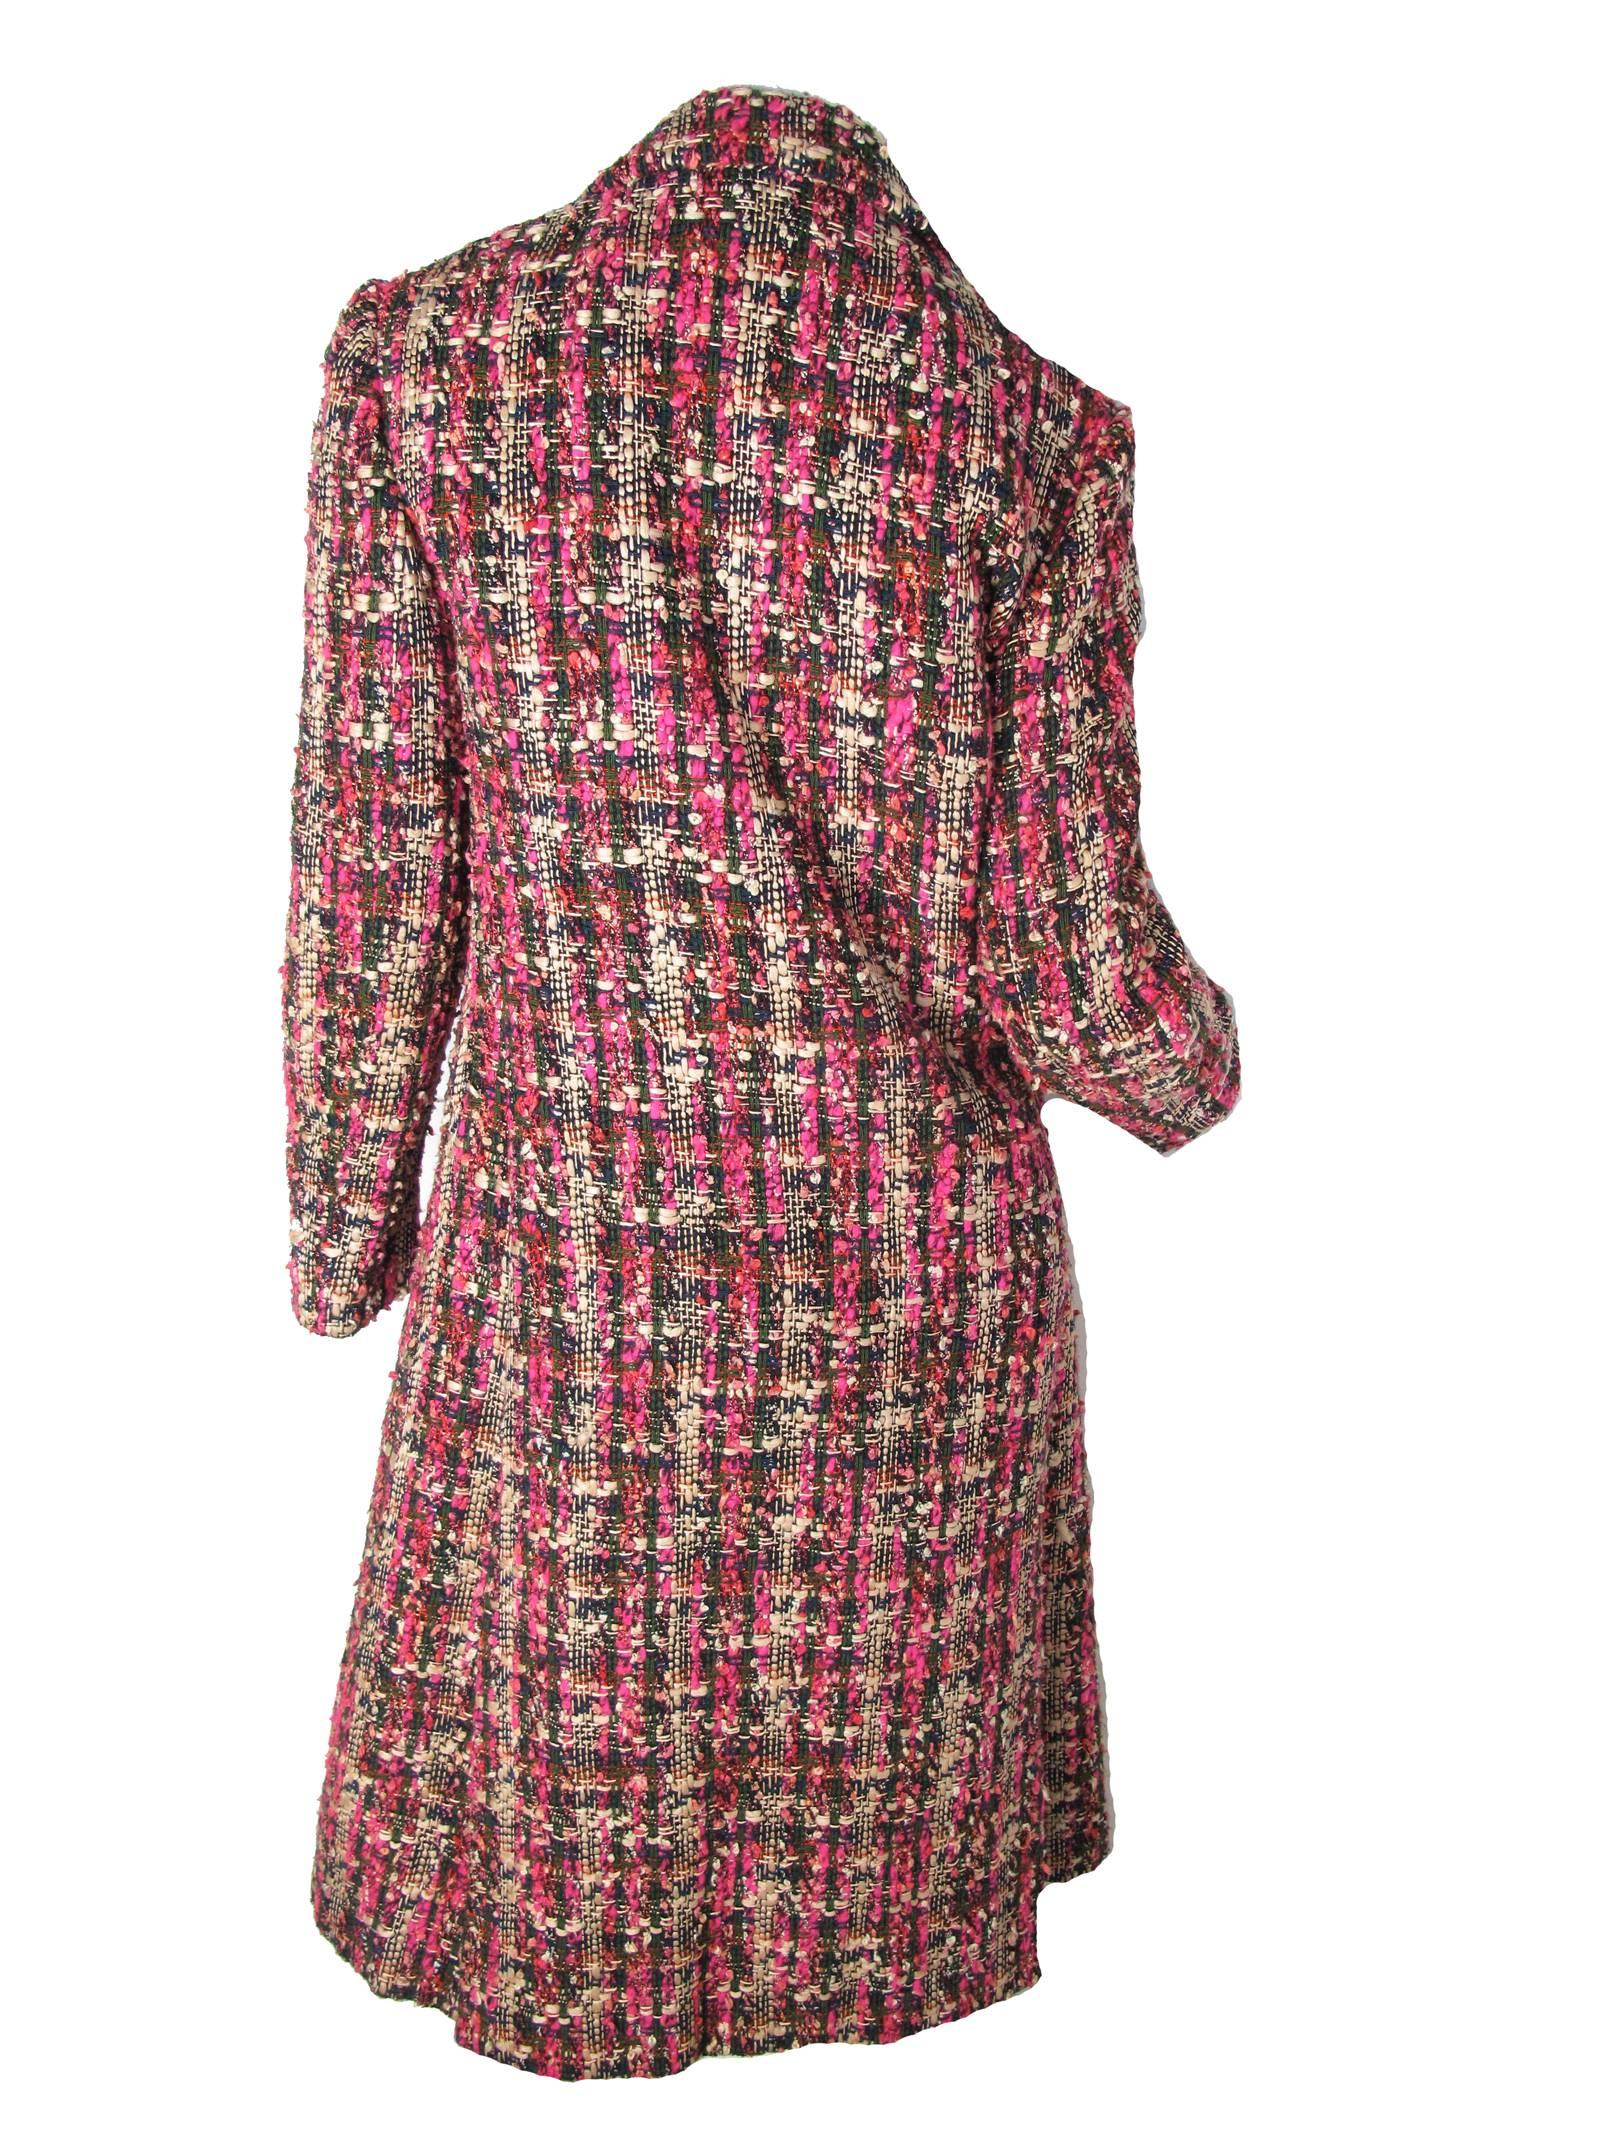 1970s Bill Blass woven coat with two front pockets, buttons down front.  Pink, green, cream. Condition: Excellent.  Label size 12 / current size 10

39